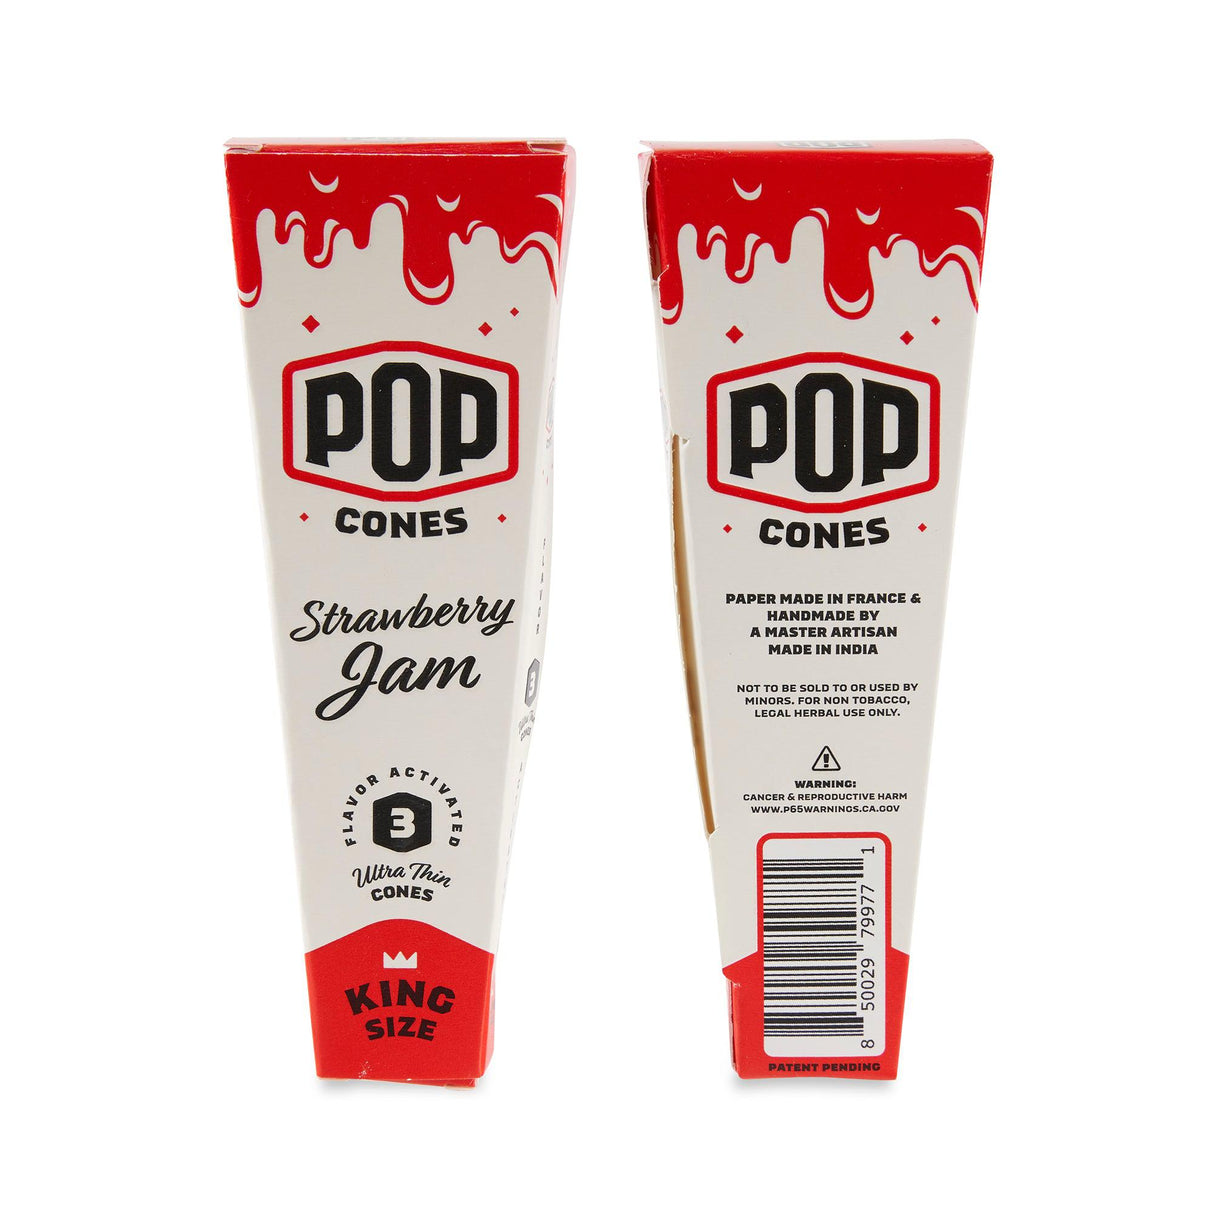 Pop Cones King Size Ultra Thin 3pk Cones with Flavor Tips 24ct Display